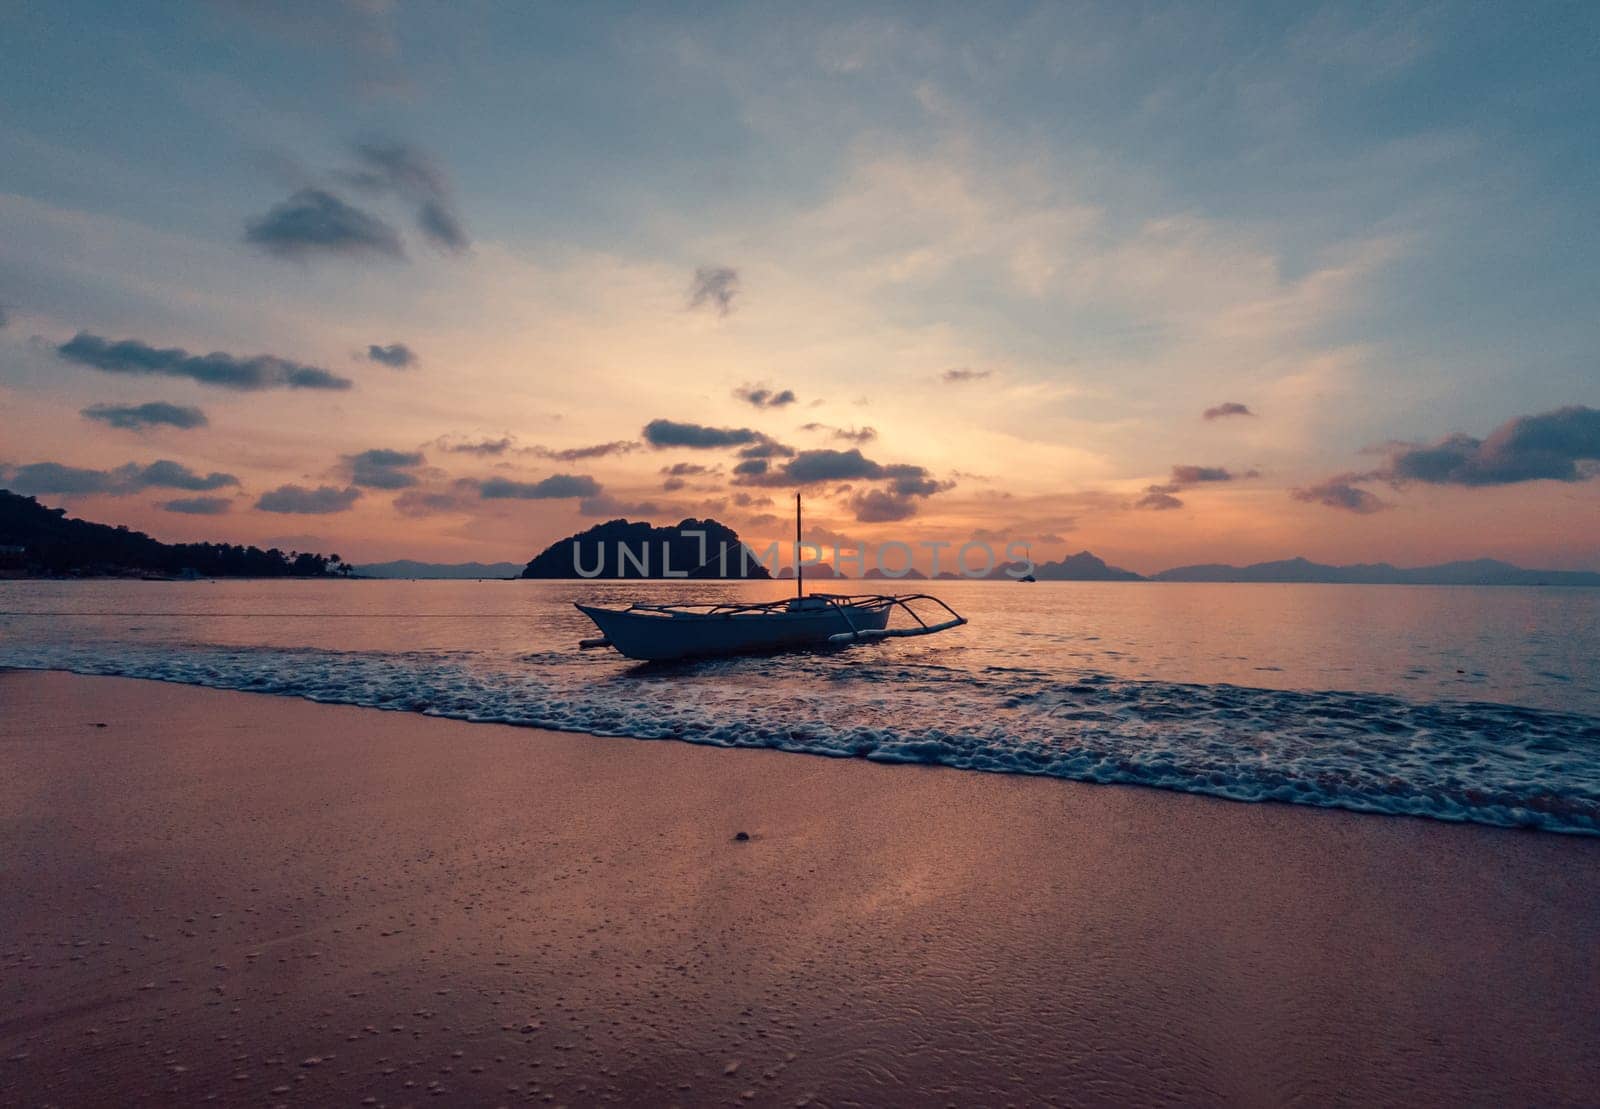 Stunning sunset over serene beach with boat in calm waters, evening time. by Busker